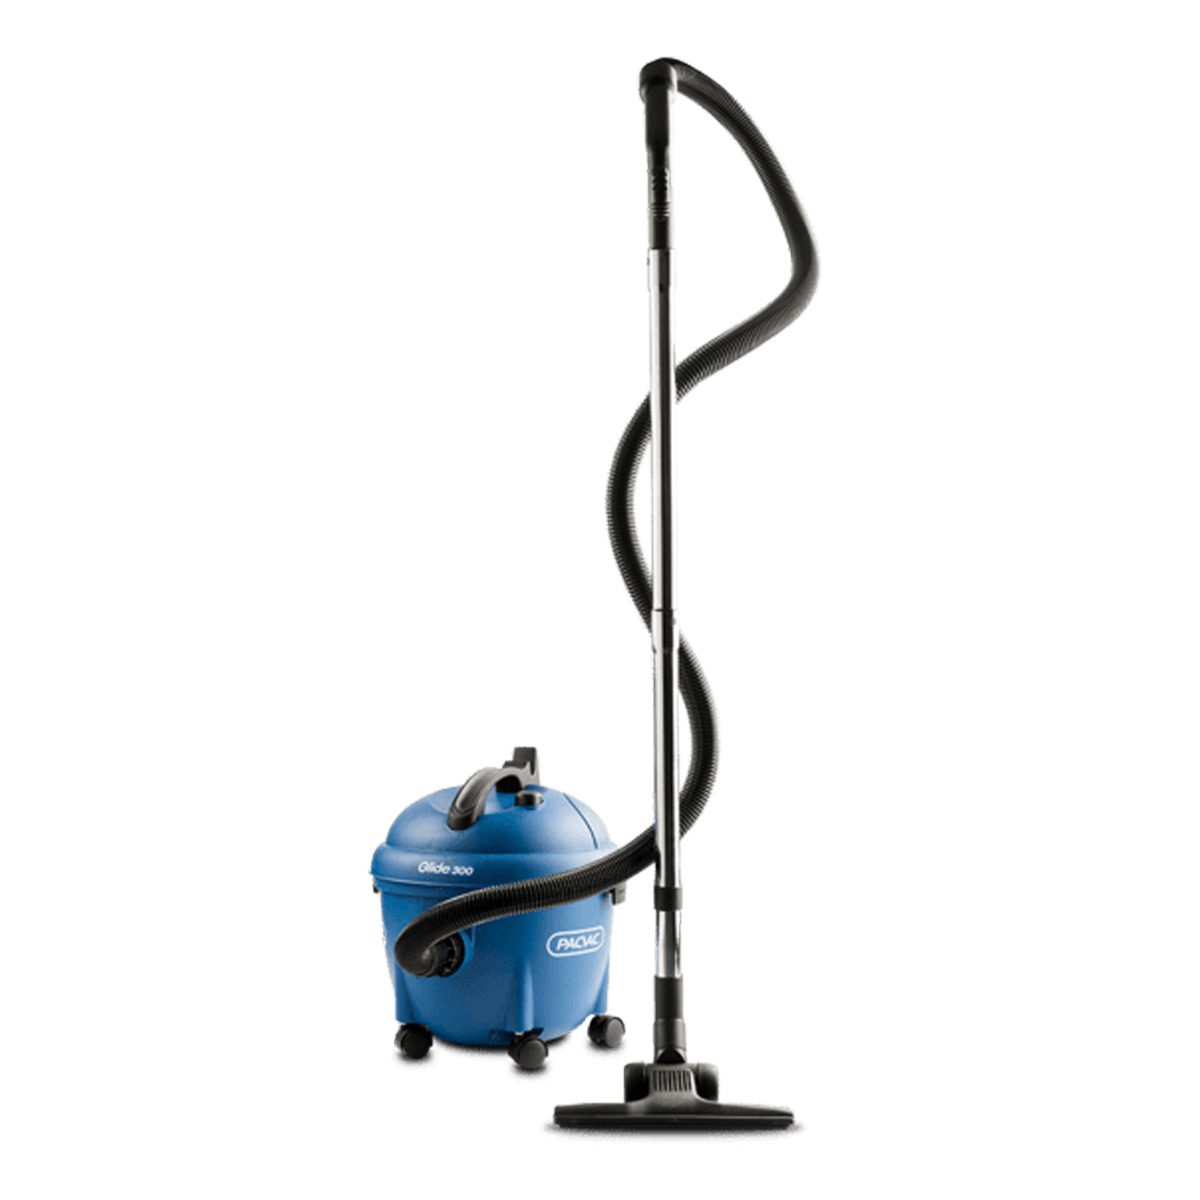 machinery-matting-vacuums-pacvac-glide-vacuum-cleaner-durable-machine-providing-optimal-performance-and-suction-15-litre-large-capacity-canister-delivering-longer-vacuum-bag-life-vjs-distributors-300GOS